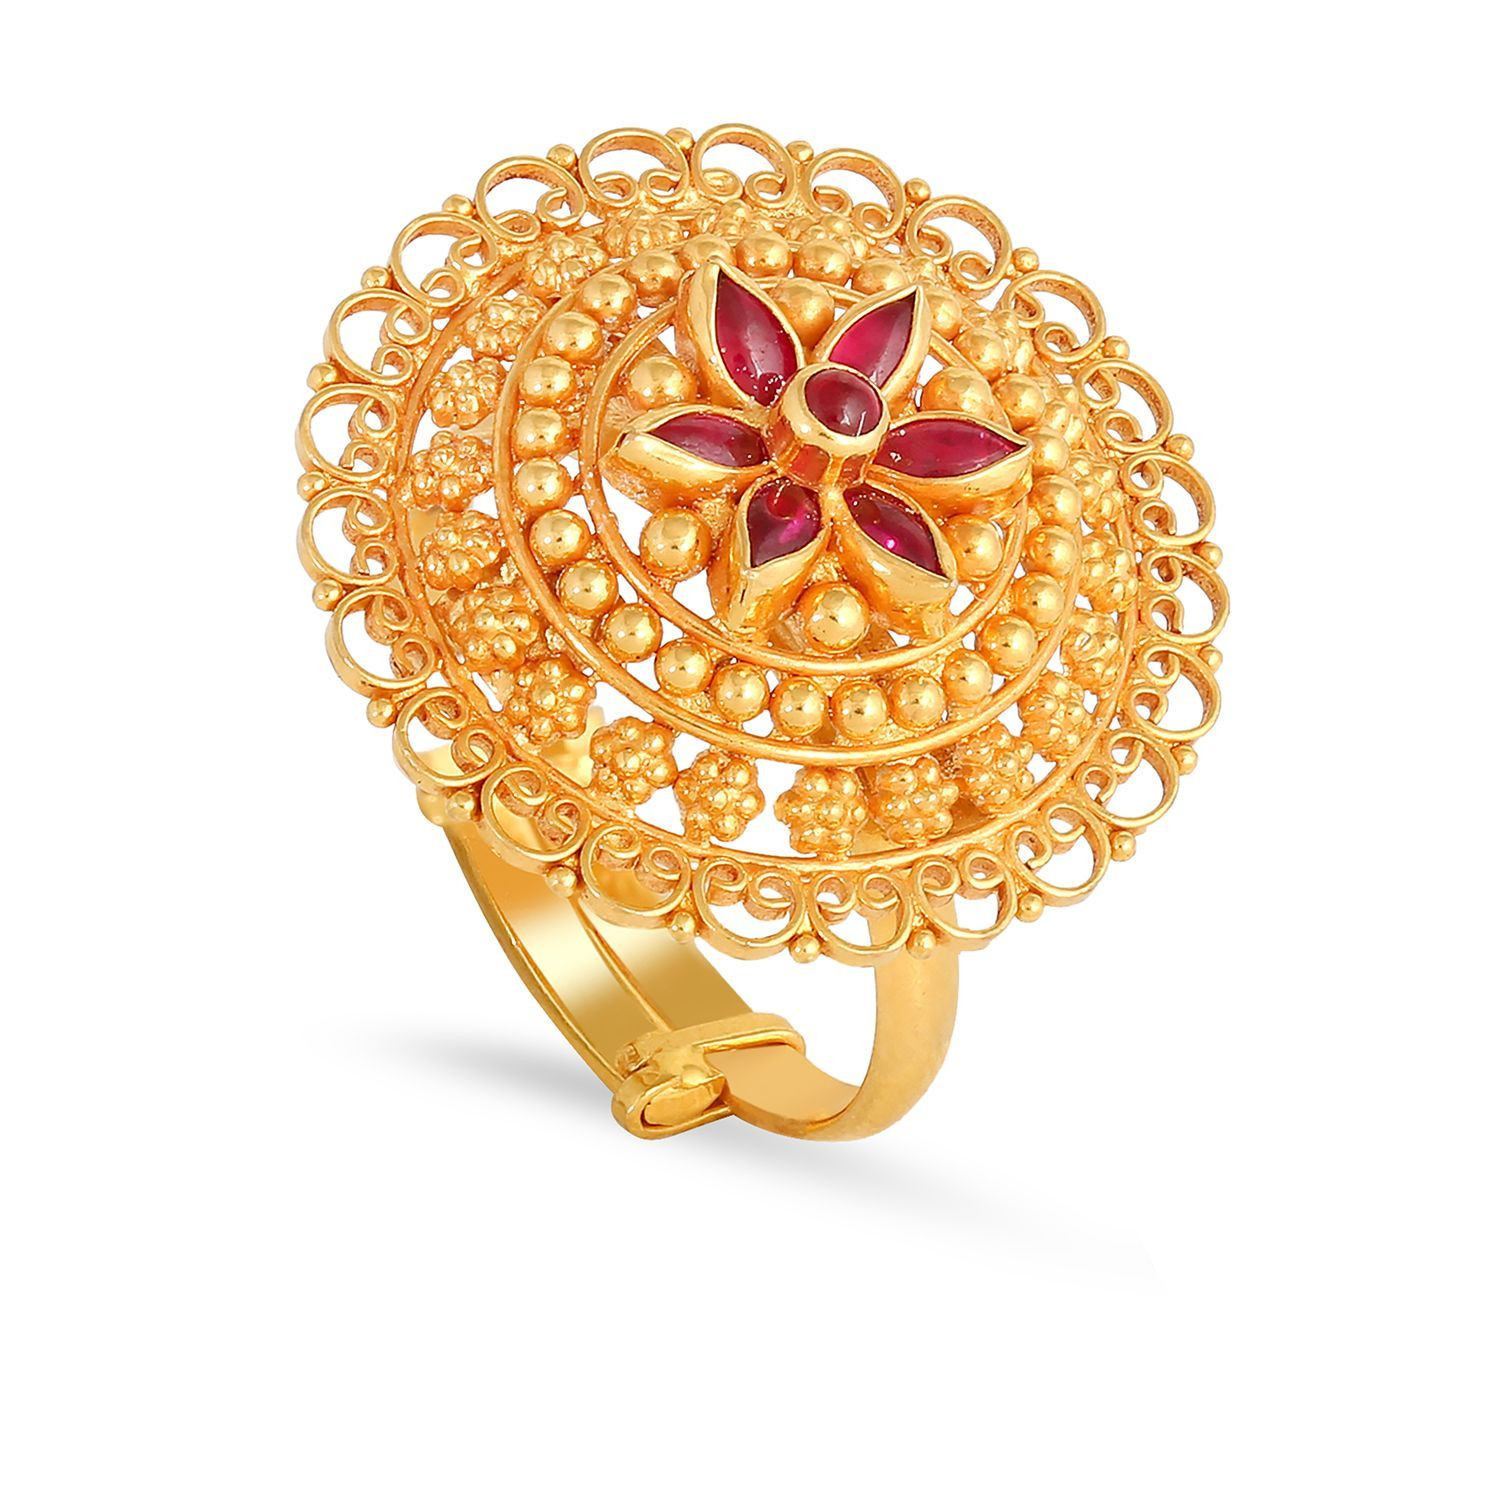 Ladies Gold Studded Rings at Rs 15000 in Amritsar | ID: 2852759859088